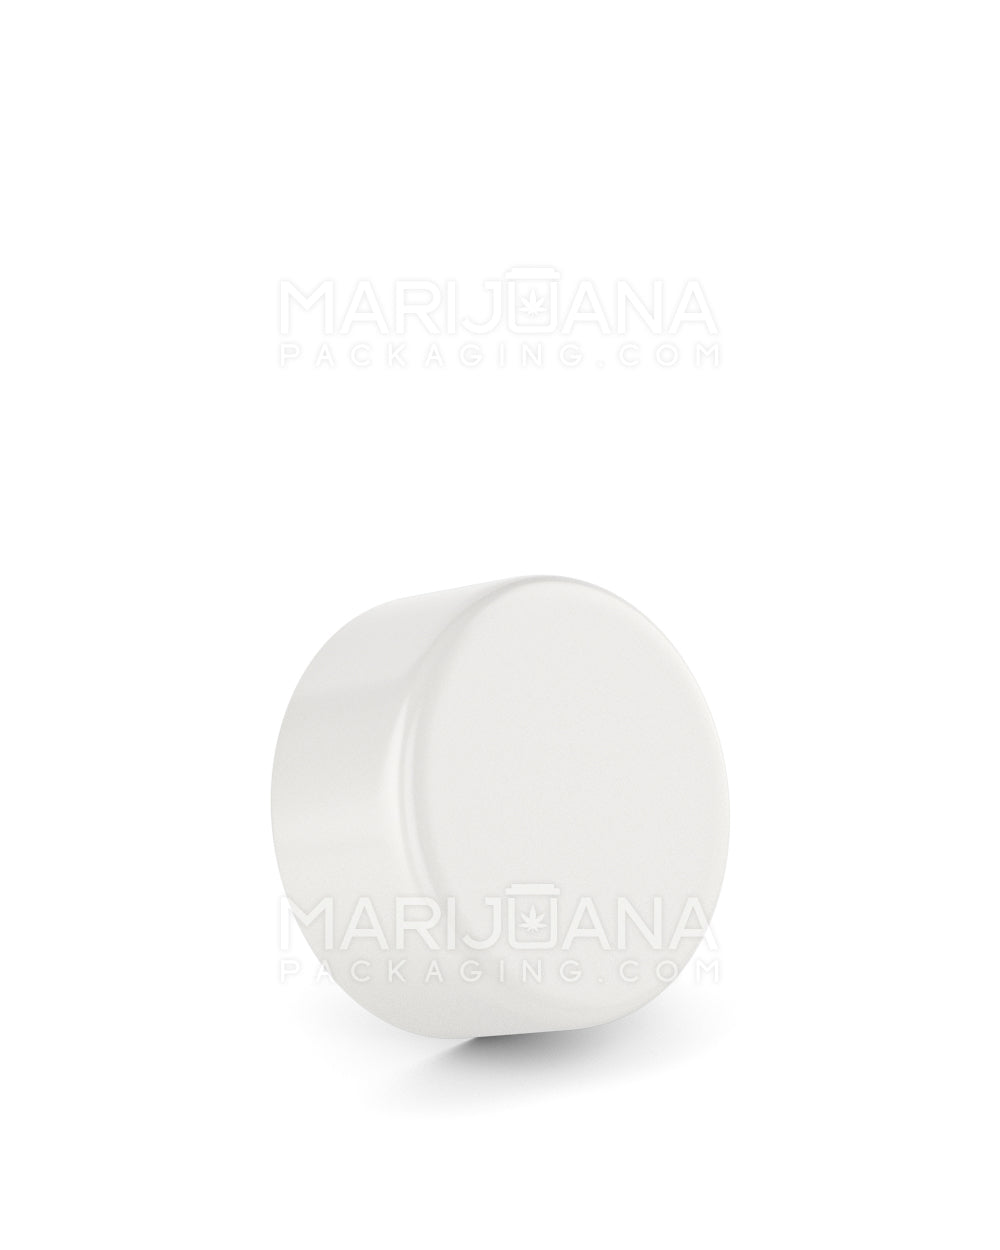 Child Resistant | Smooth Flat Push Down & Turn Plastic Caps w/ Foam Liner | 29mm - Glossy White - 300 Count - 1